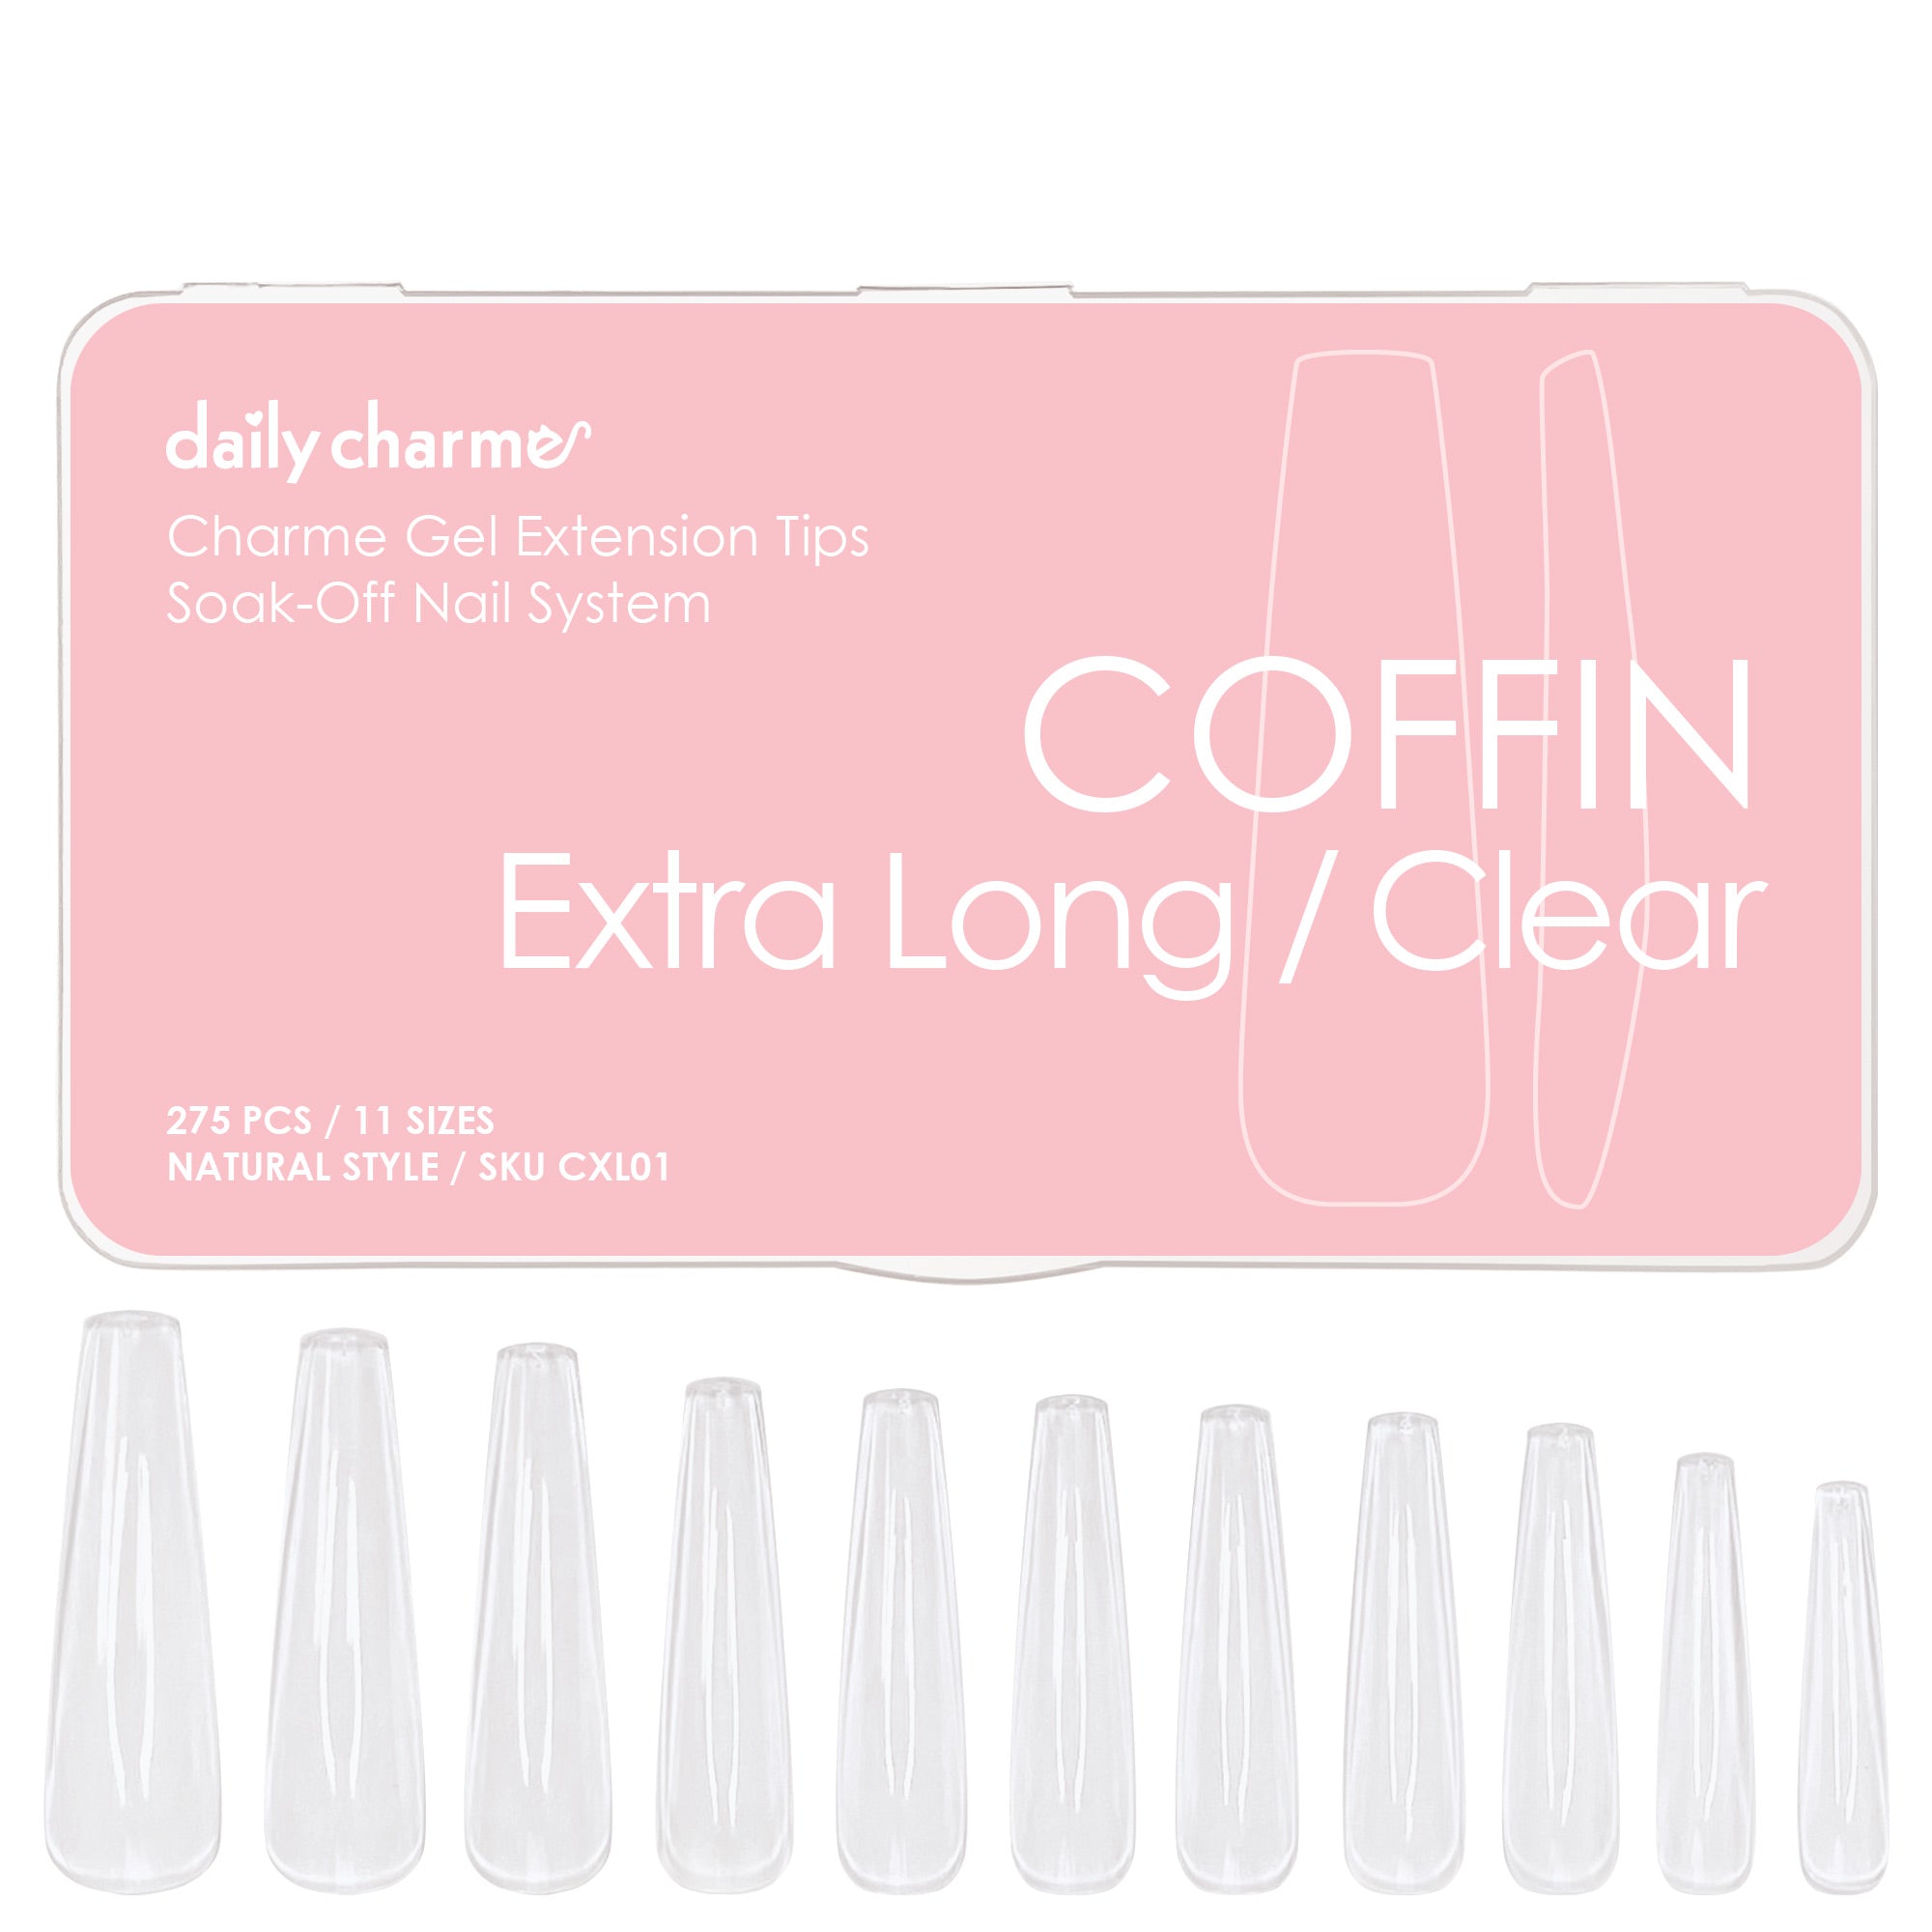 Charme Gel Extension Tips / Coffin Ballerina Extra Long / Clear Gel Nail